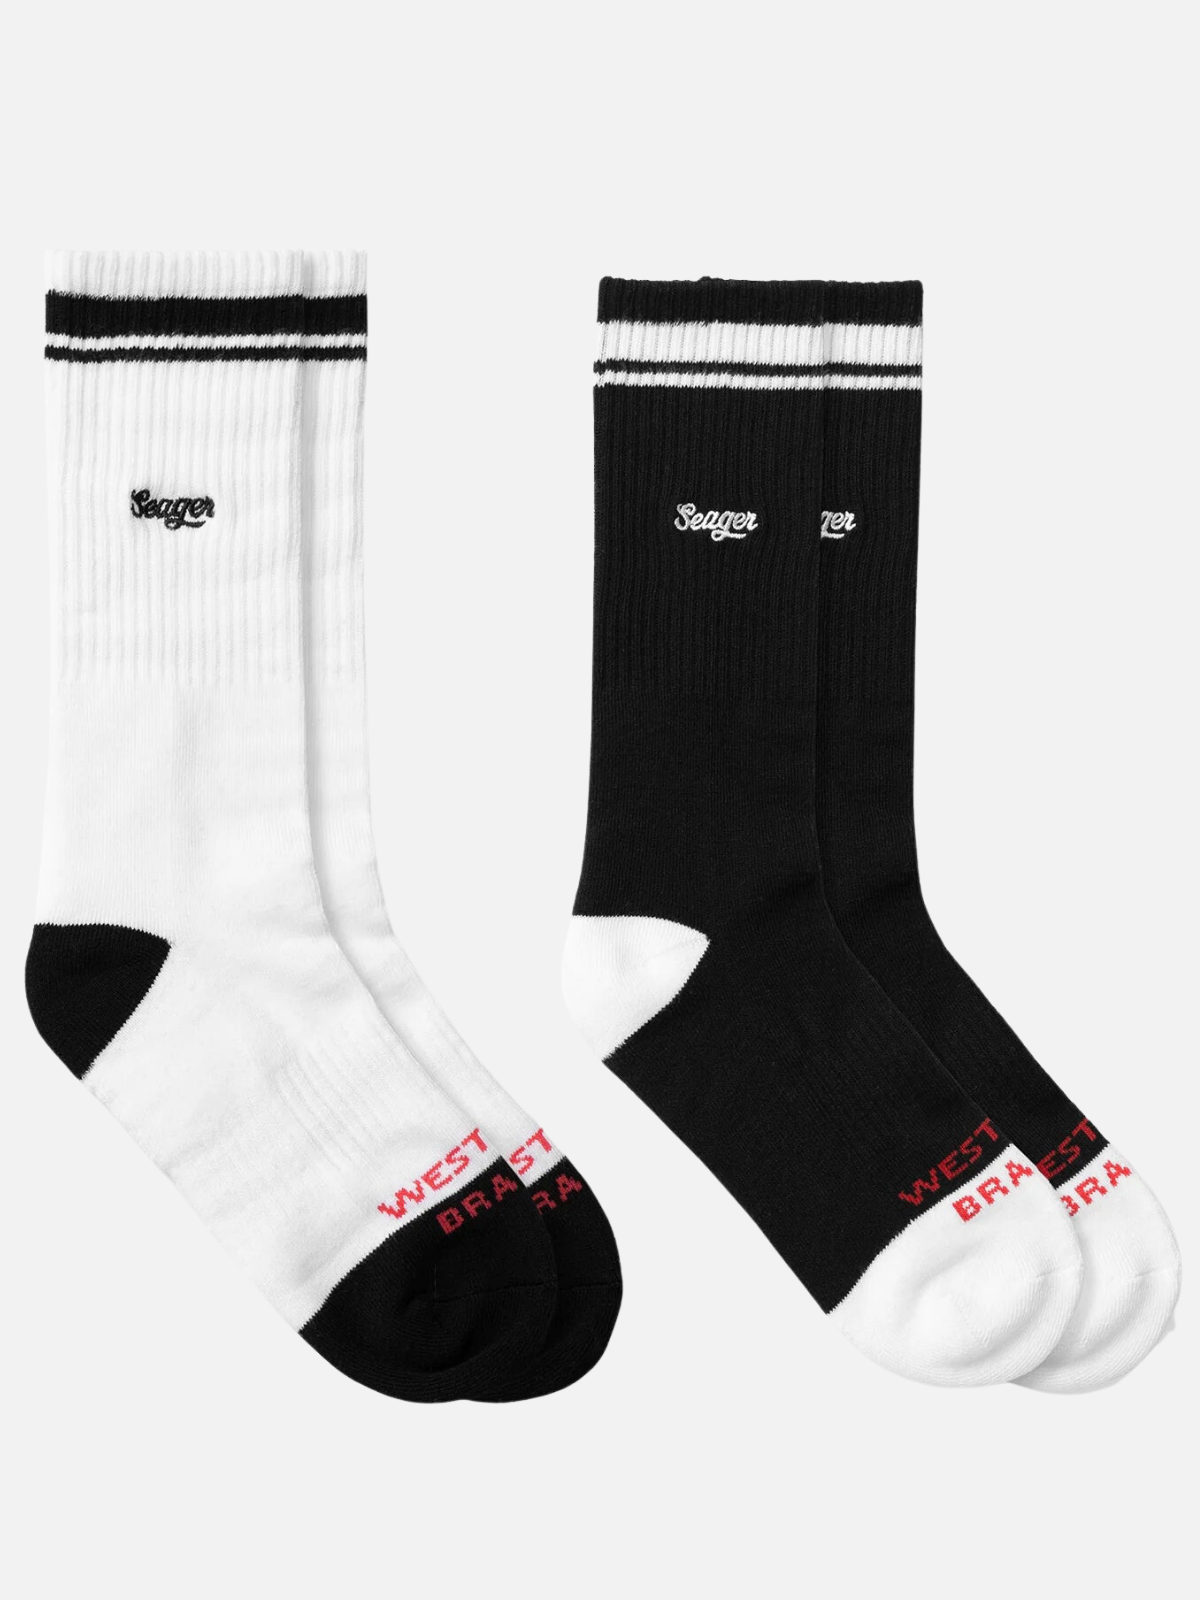 seager daily crew socks 2 pack black and white cotton Kempt mens wear store athens ga Seager Daily Crew Socks Embroidered Western Brand Athletic Socks Kempt Mens Clothing Store Downtown Athens Georgia Shopping